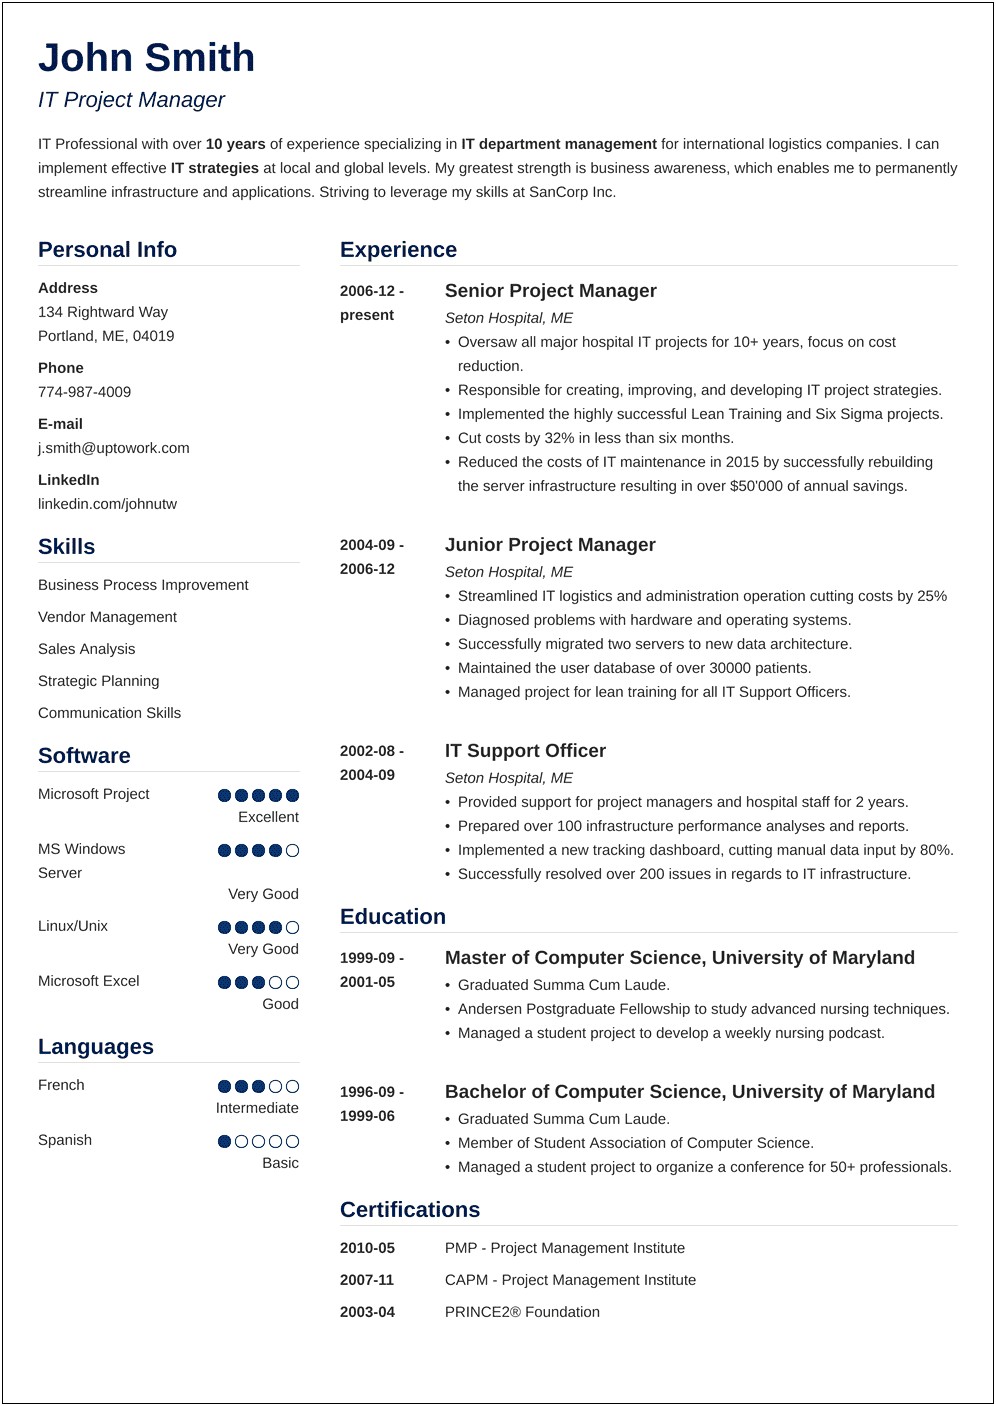 Project Manager Roles And Responsibilities For Resume